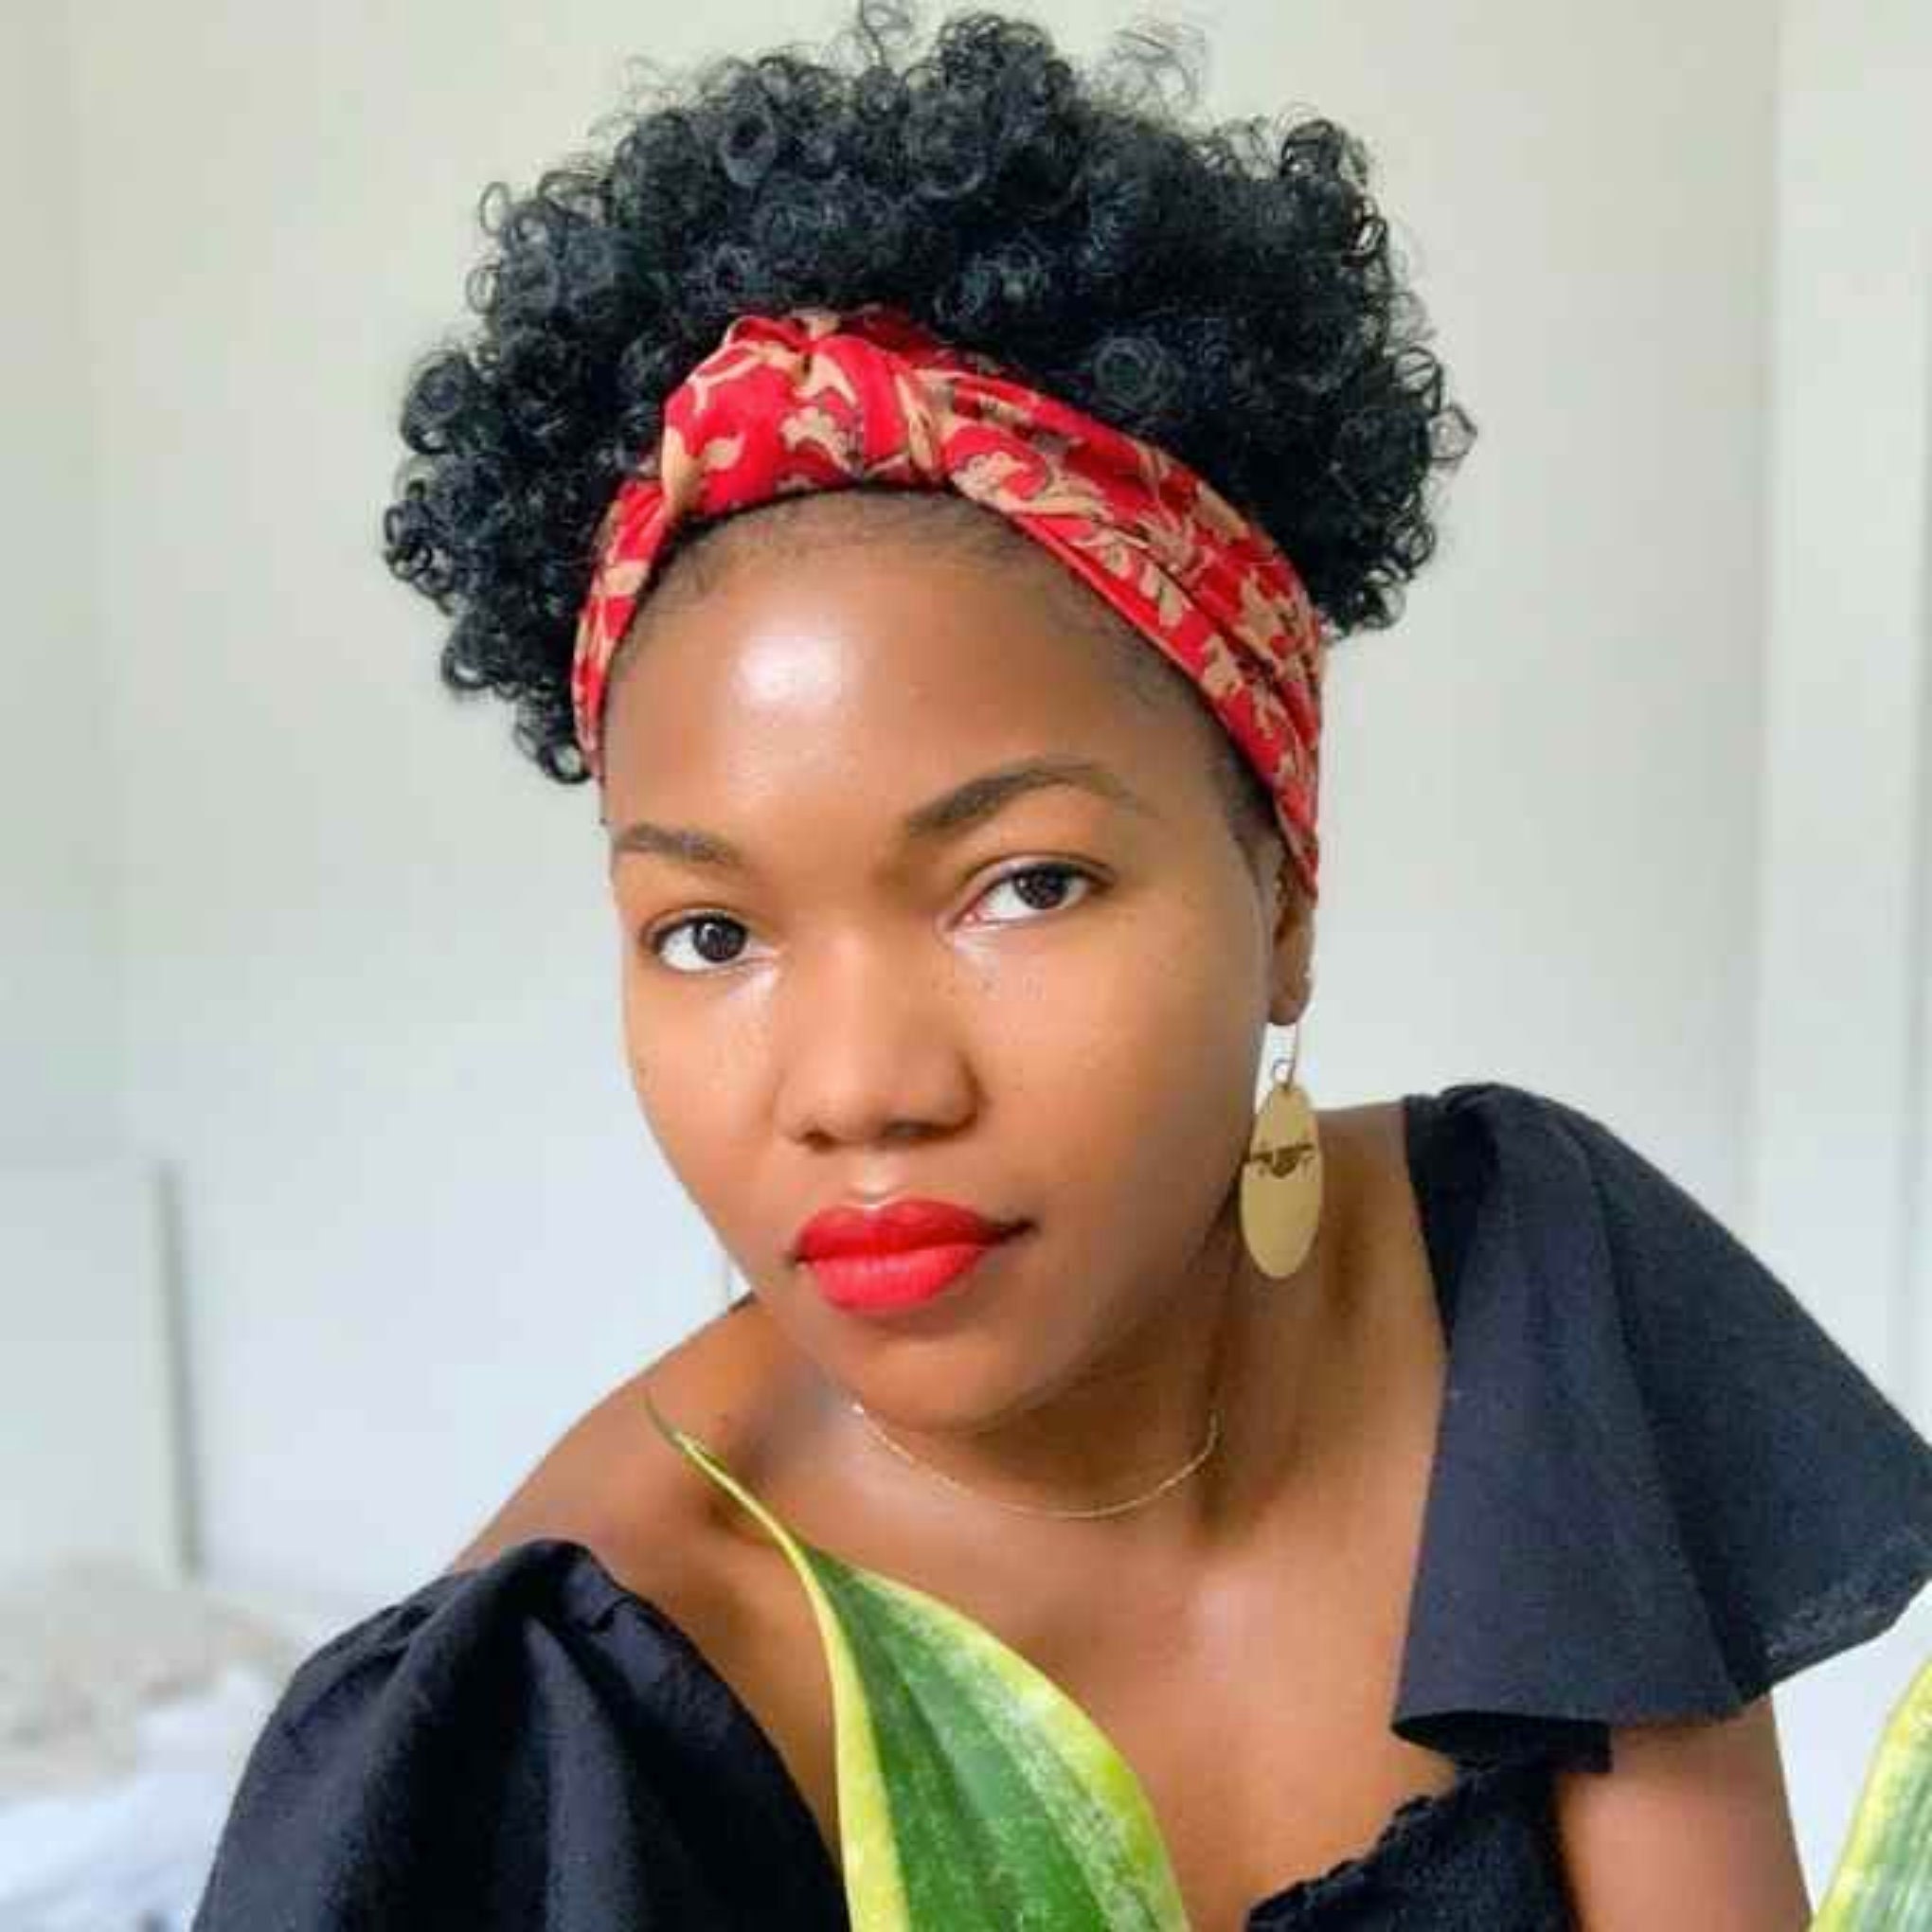 40 Easy Rubber Band Hairstyles on Natural Hair To Try in 2023  Coils and  Glory  Natural afro hairstyles Natural hair braids Natural curls  hairstyles